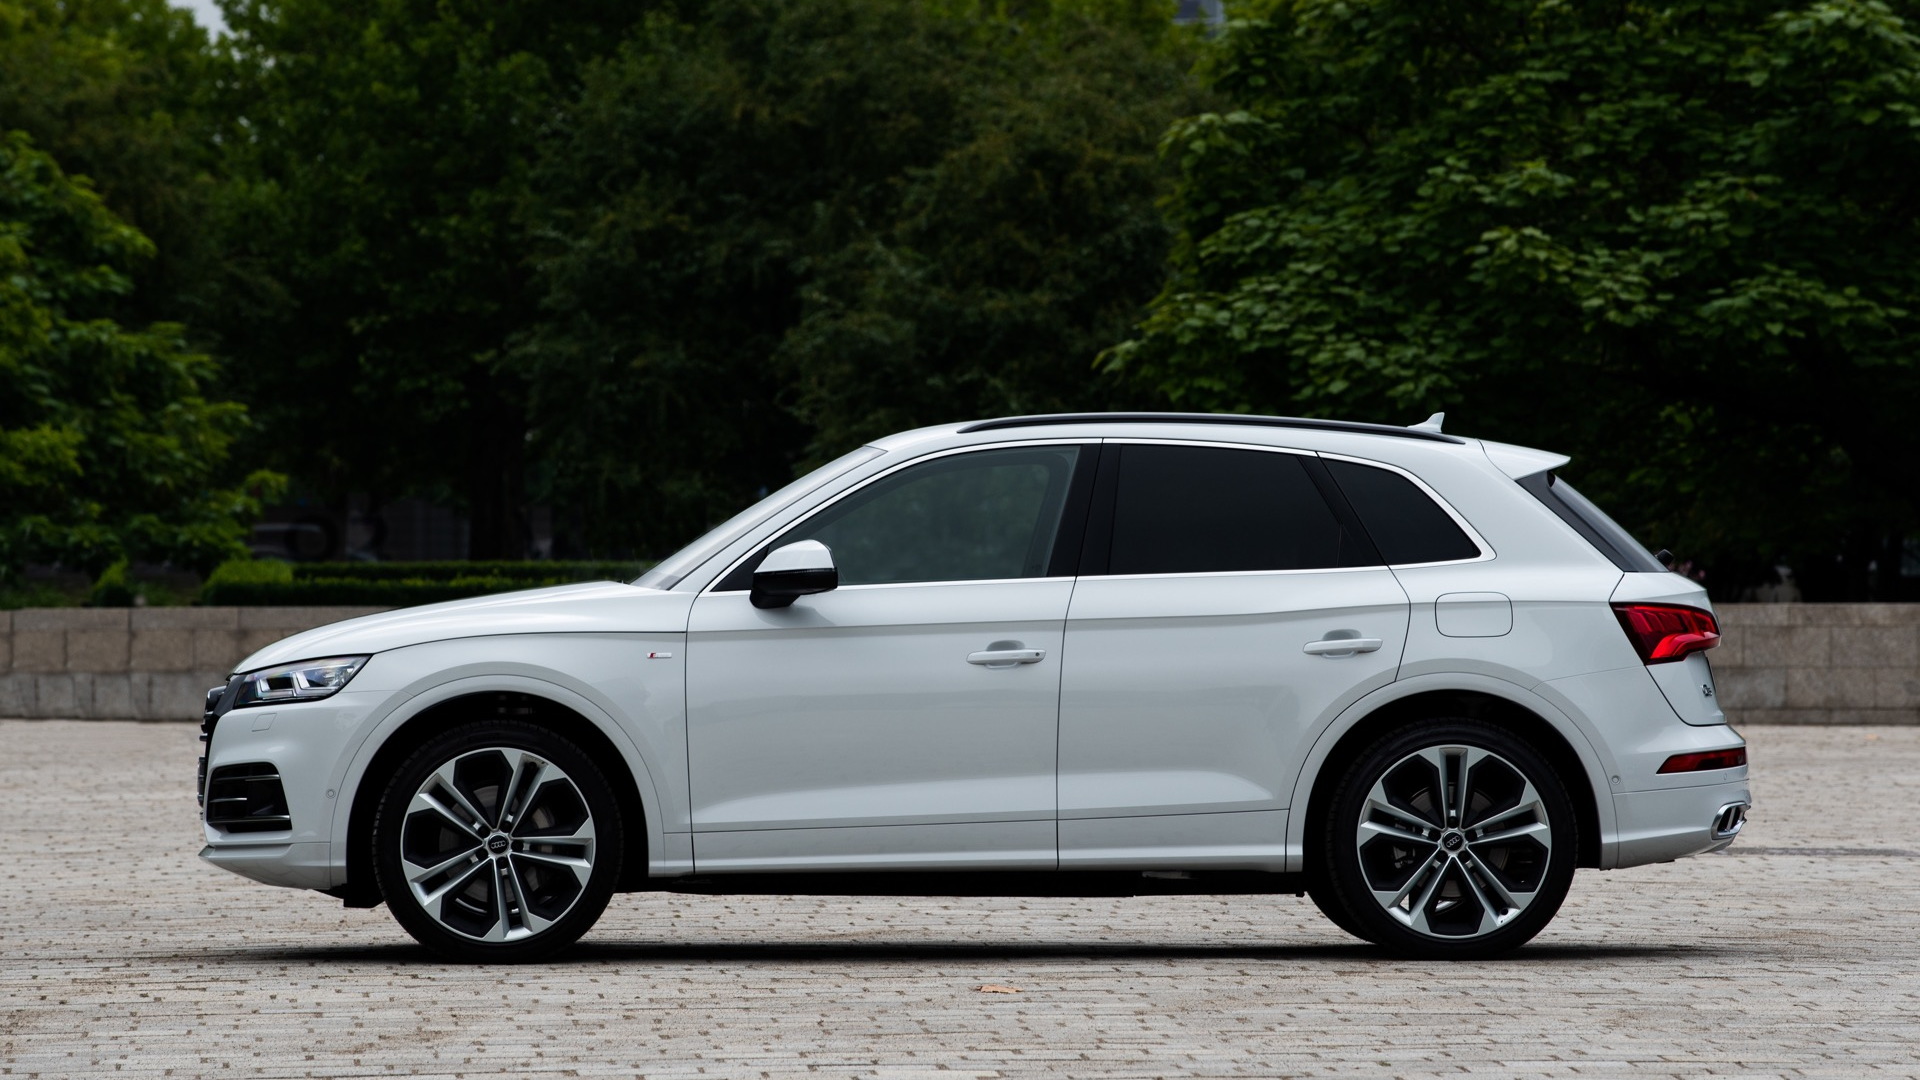 Plug In Hybrid Versions Of Audi Q5 Crossover And A8 Sedan Arrive For The Us